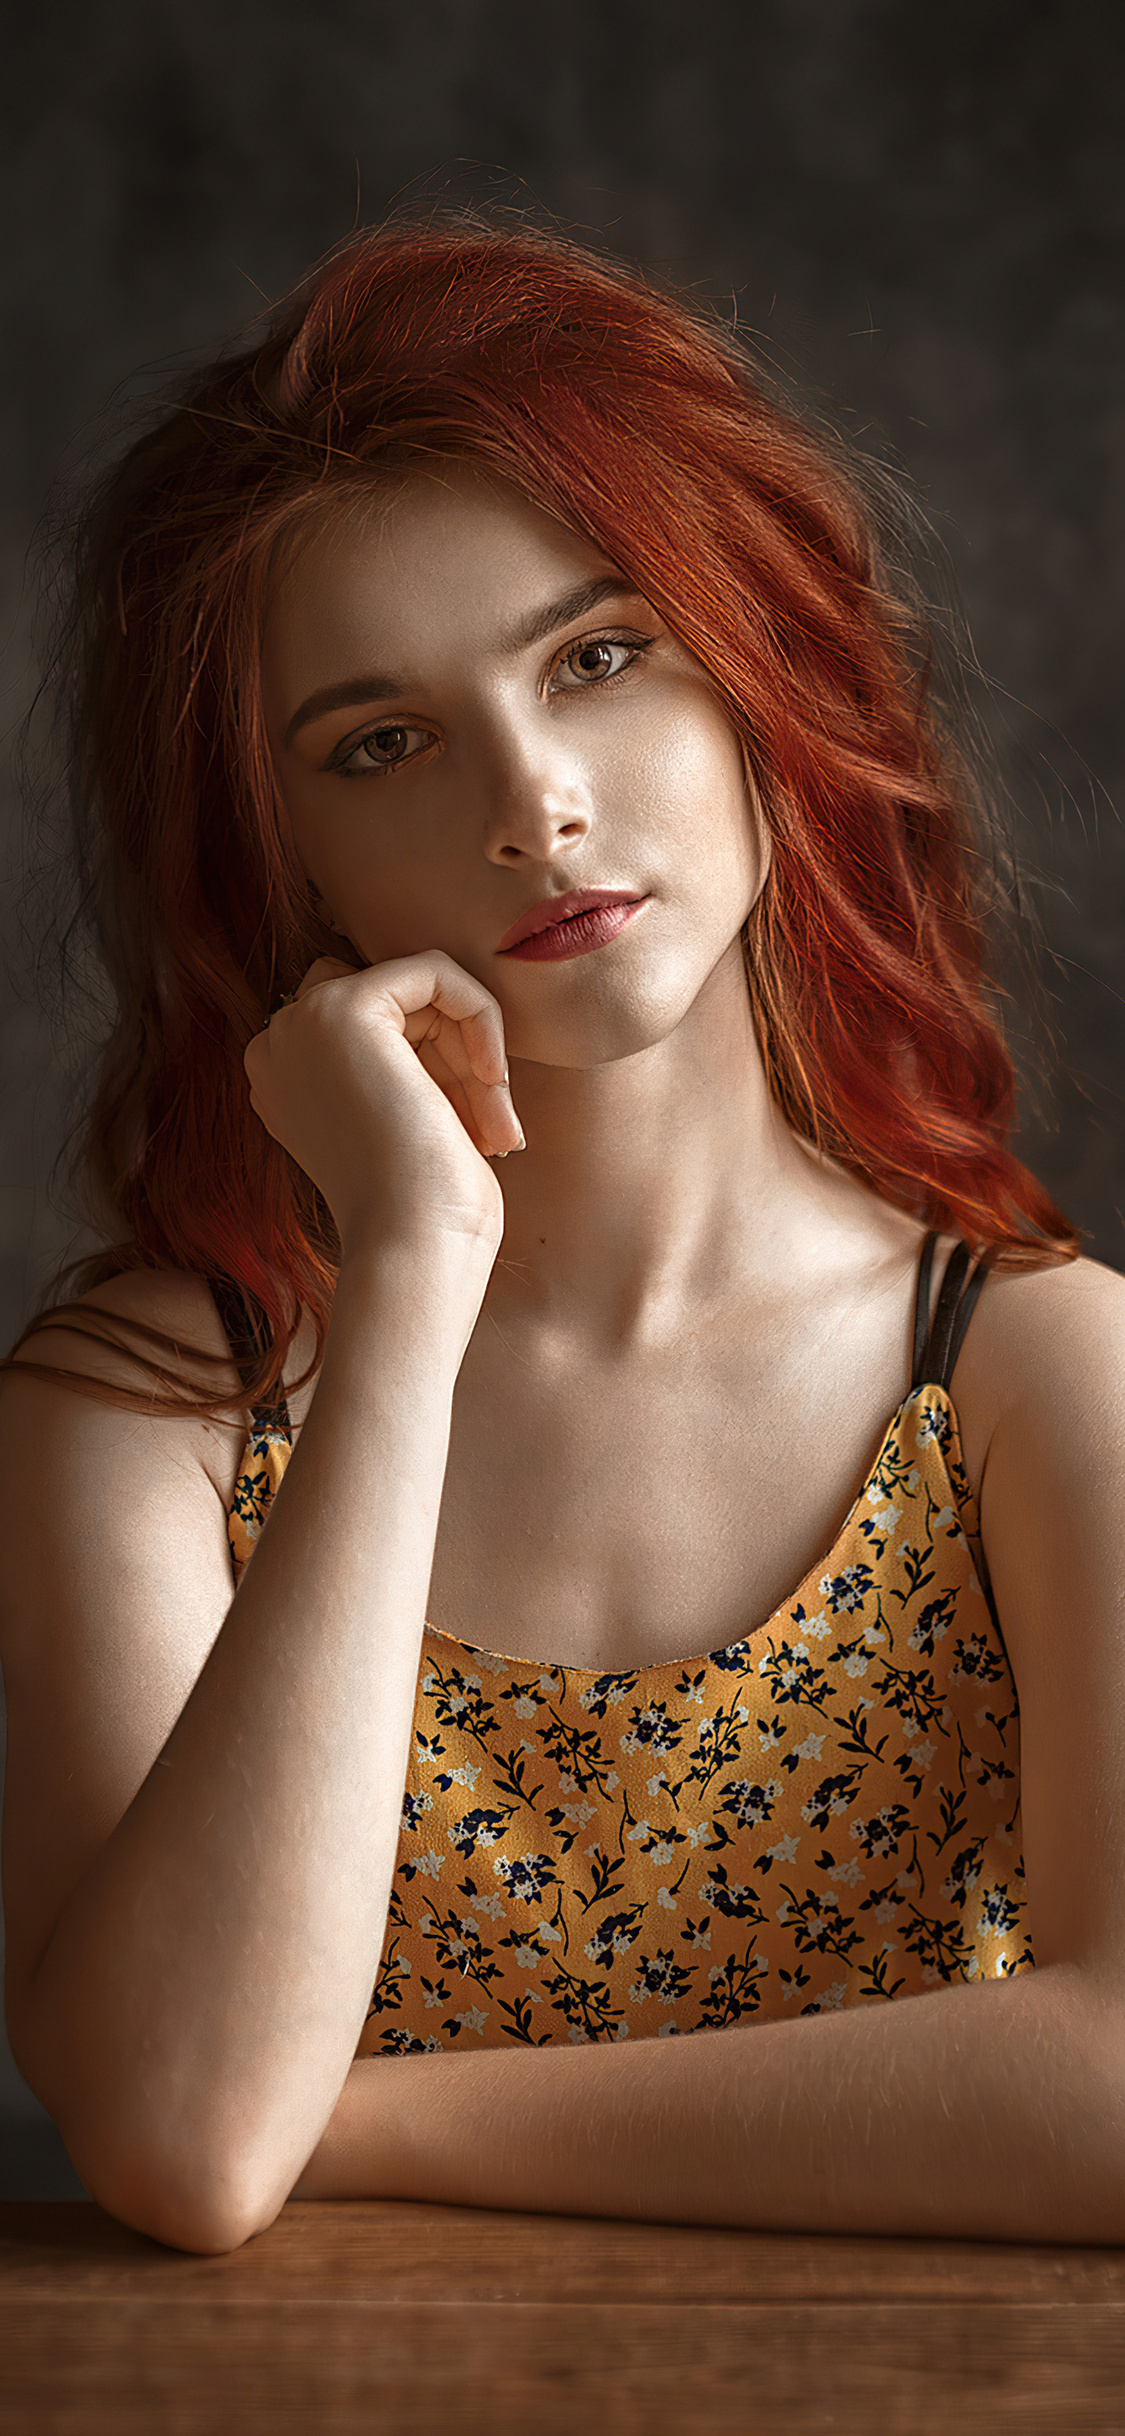 1125x2436 Redhead Model Portrait Iphone XS,Iphone 10,Iphone X HD 4k Wallpapers, Images, Backgrounds, Photos and Pictures